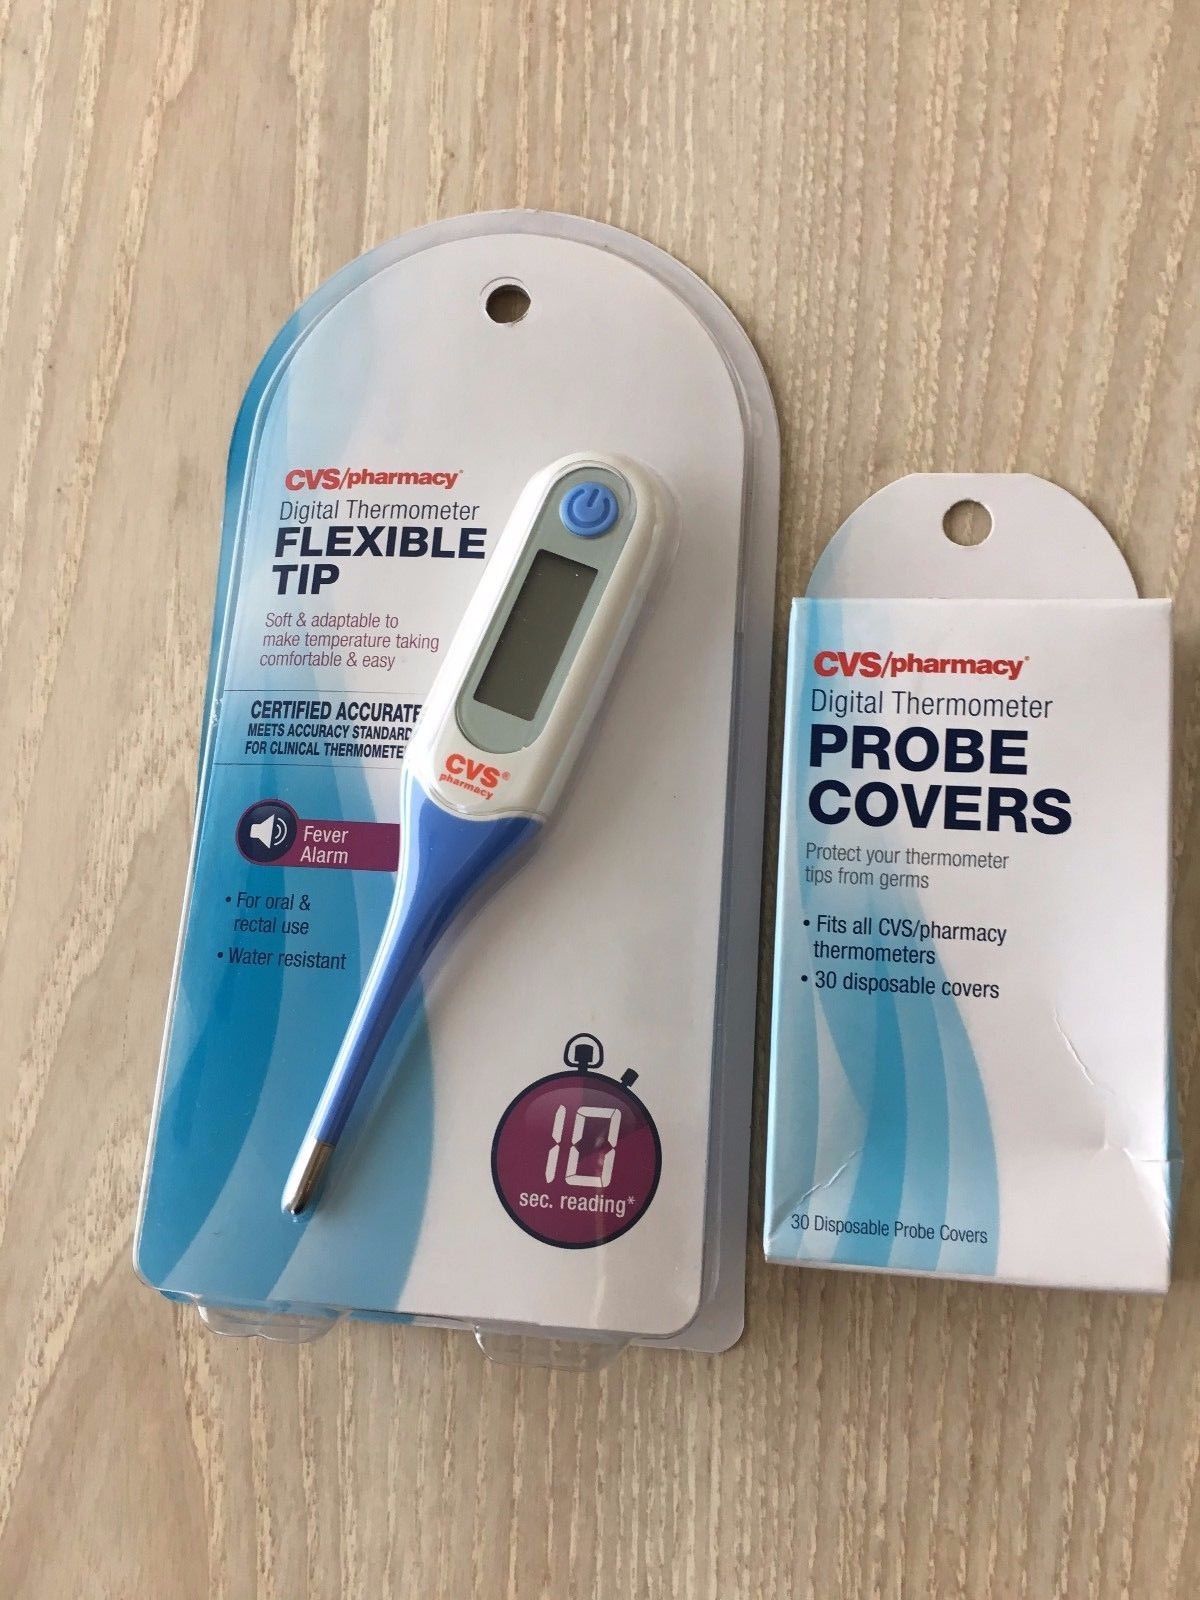 CVS DIGITAL THERMOMETER FLEXIBLE TIP&30 DISPOSABLE PROBE COVERS-ORAL &RECTAL USE